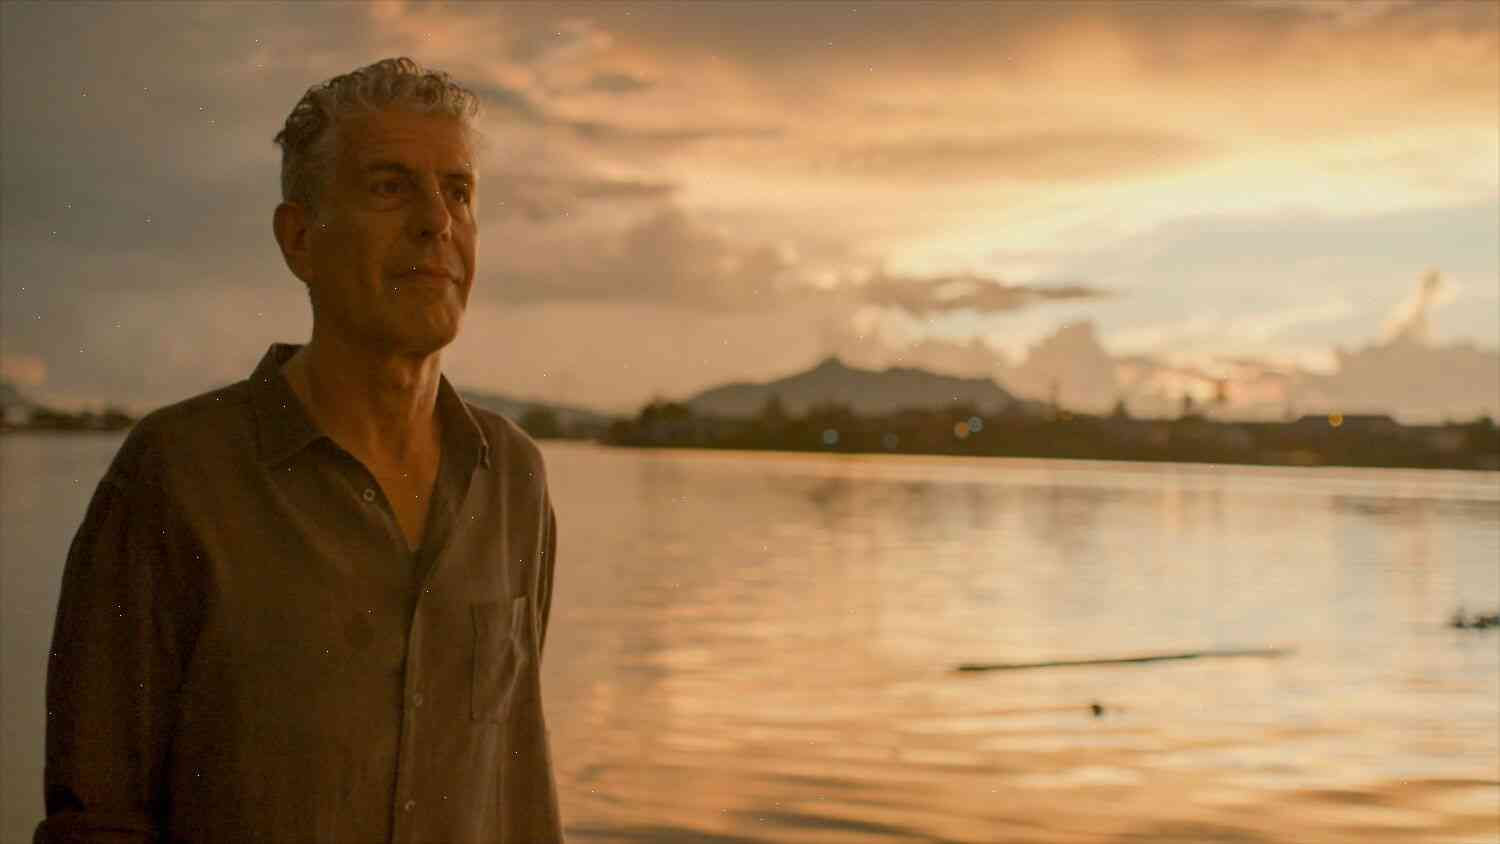 The Media’s Questions About Anthony Bourdain’s Death